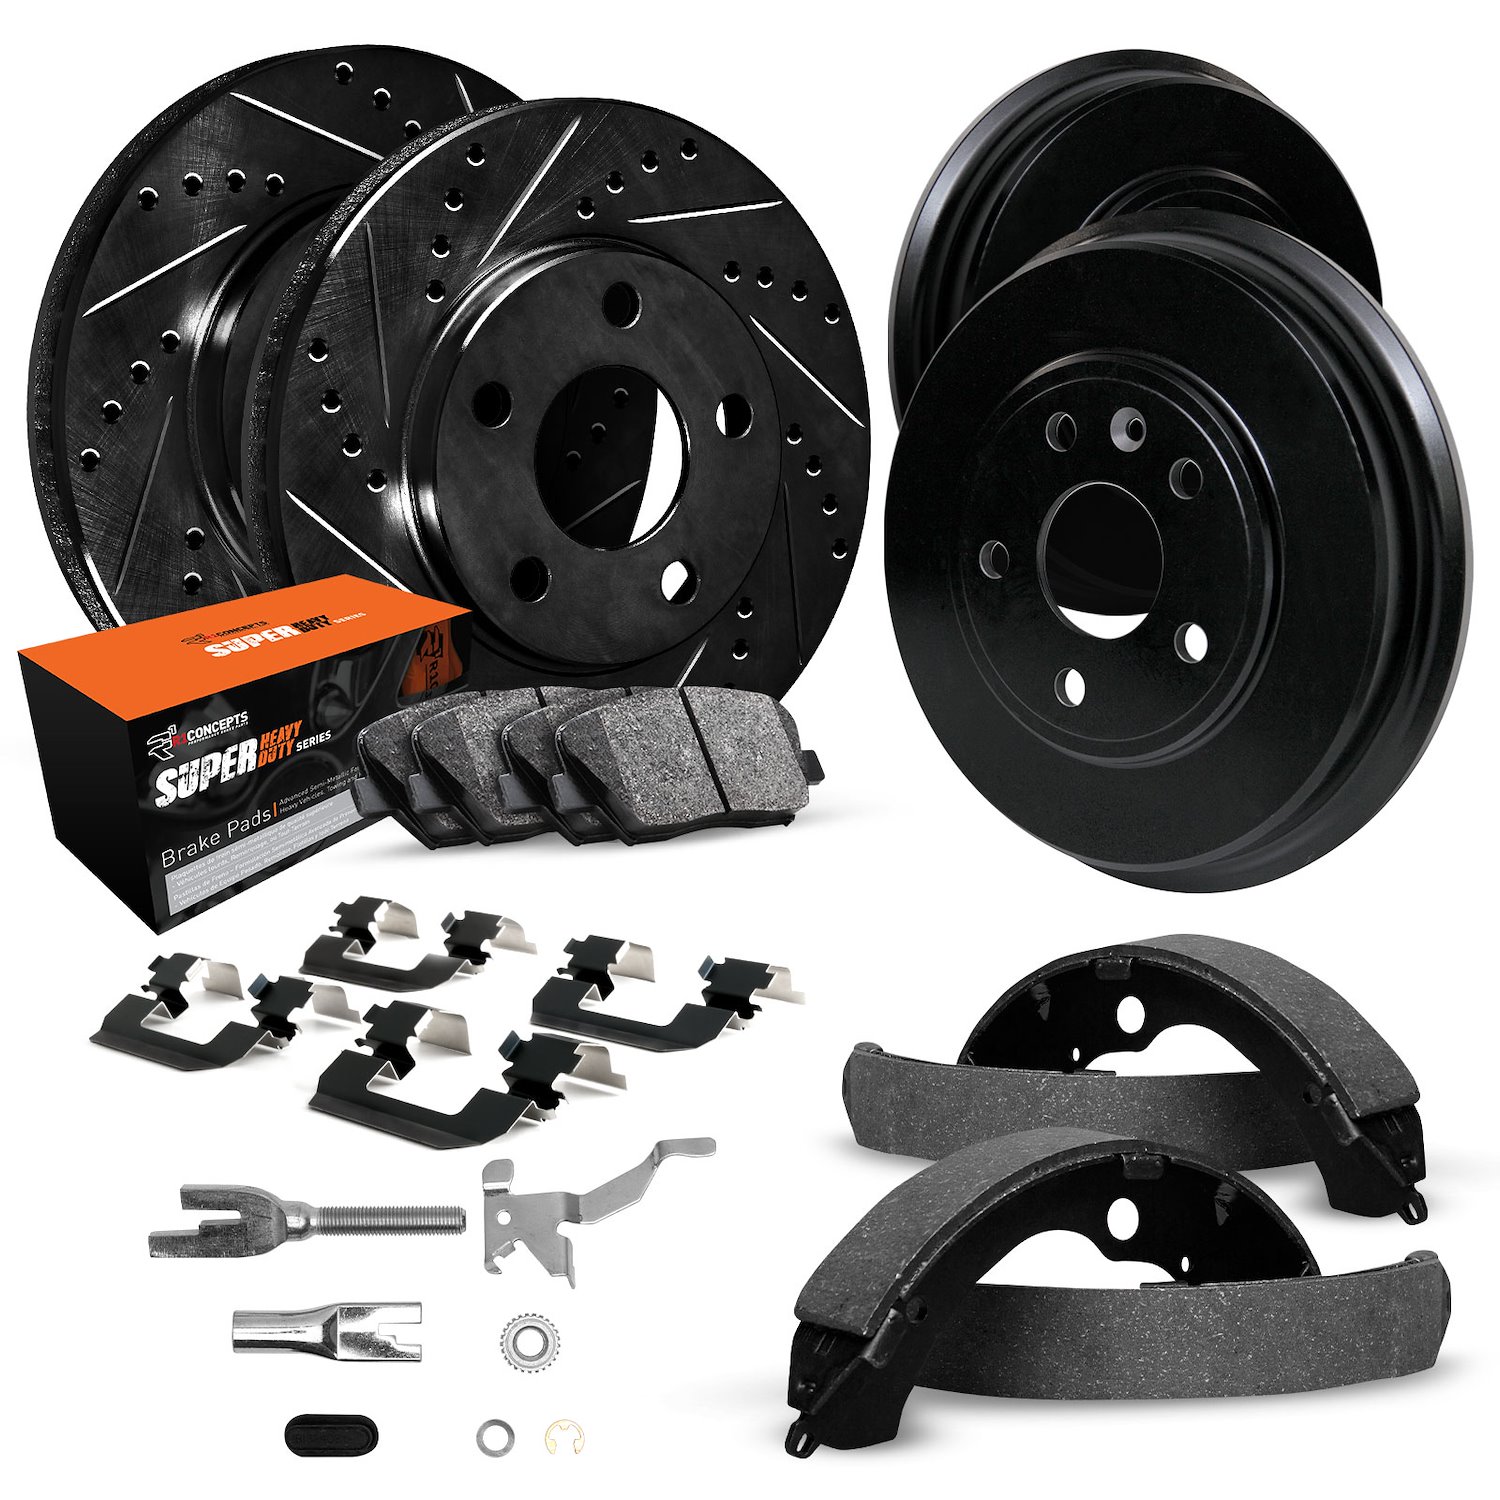 E-Line Slotted Black Brake Rotor & Drum Set w/Super-Duty Pads, Shoes, Hardware/Adjusters, 1977-1985 Ford/Lincoln/Mercury/Mazda